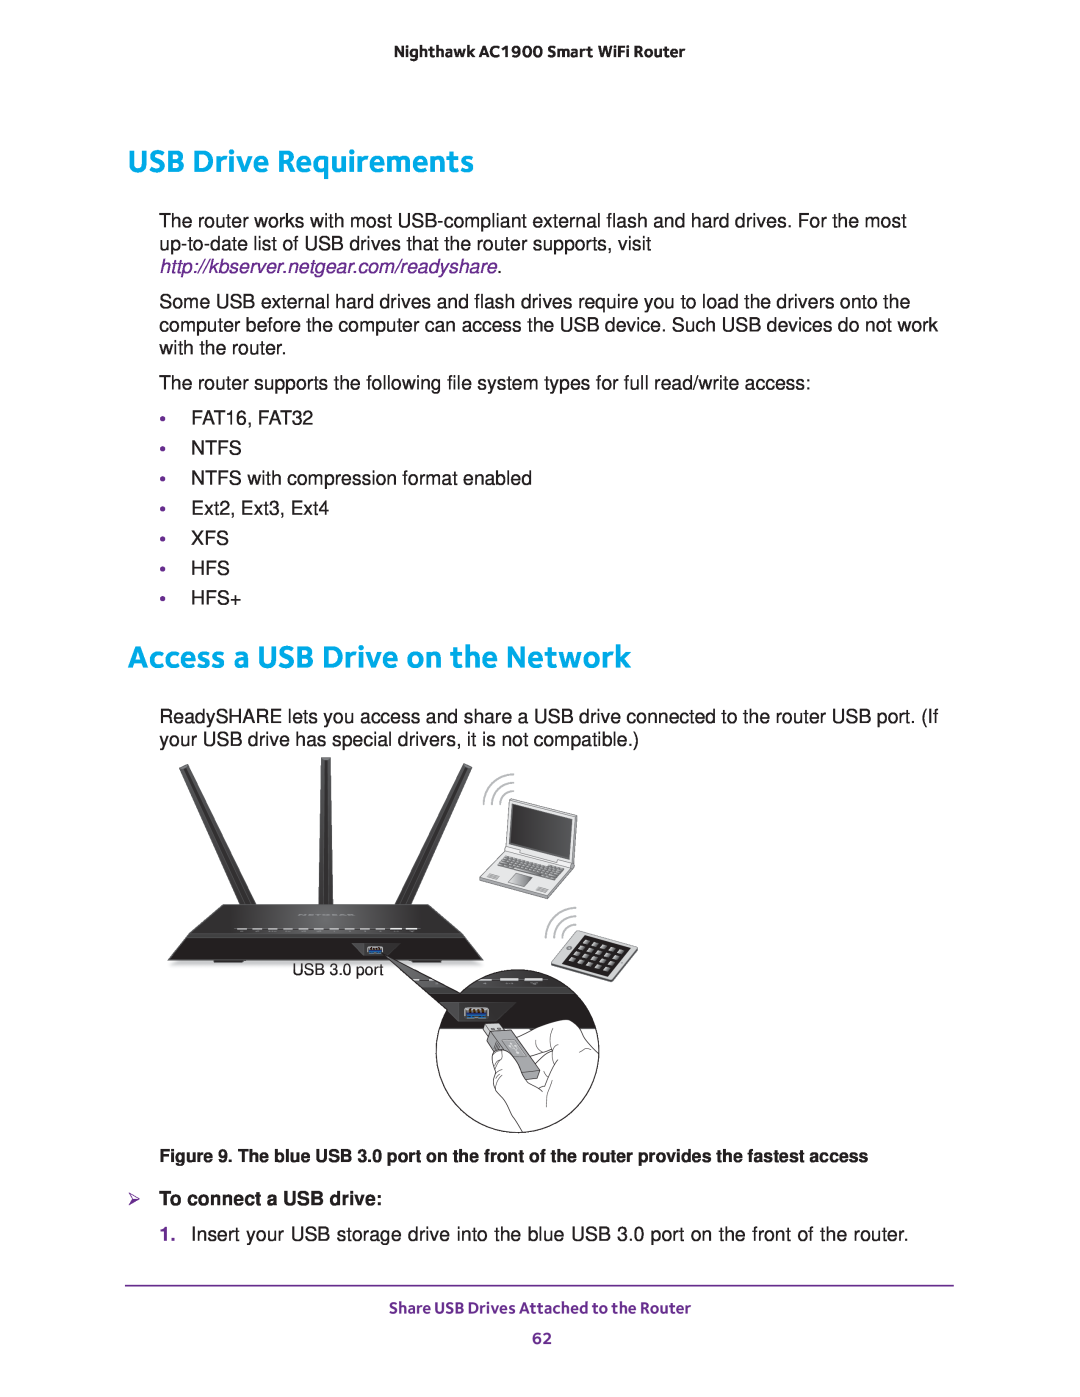 NETGEAR Model R7000 user manual USB Drive Requirements, Access a USB Drive on the Network,  To connect a USB drive 